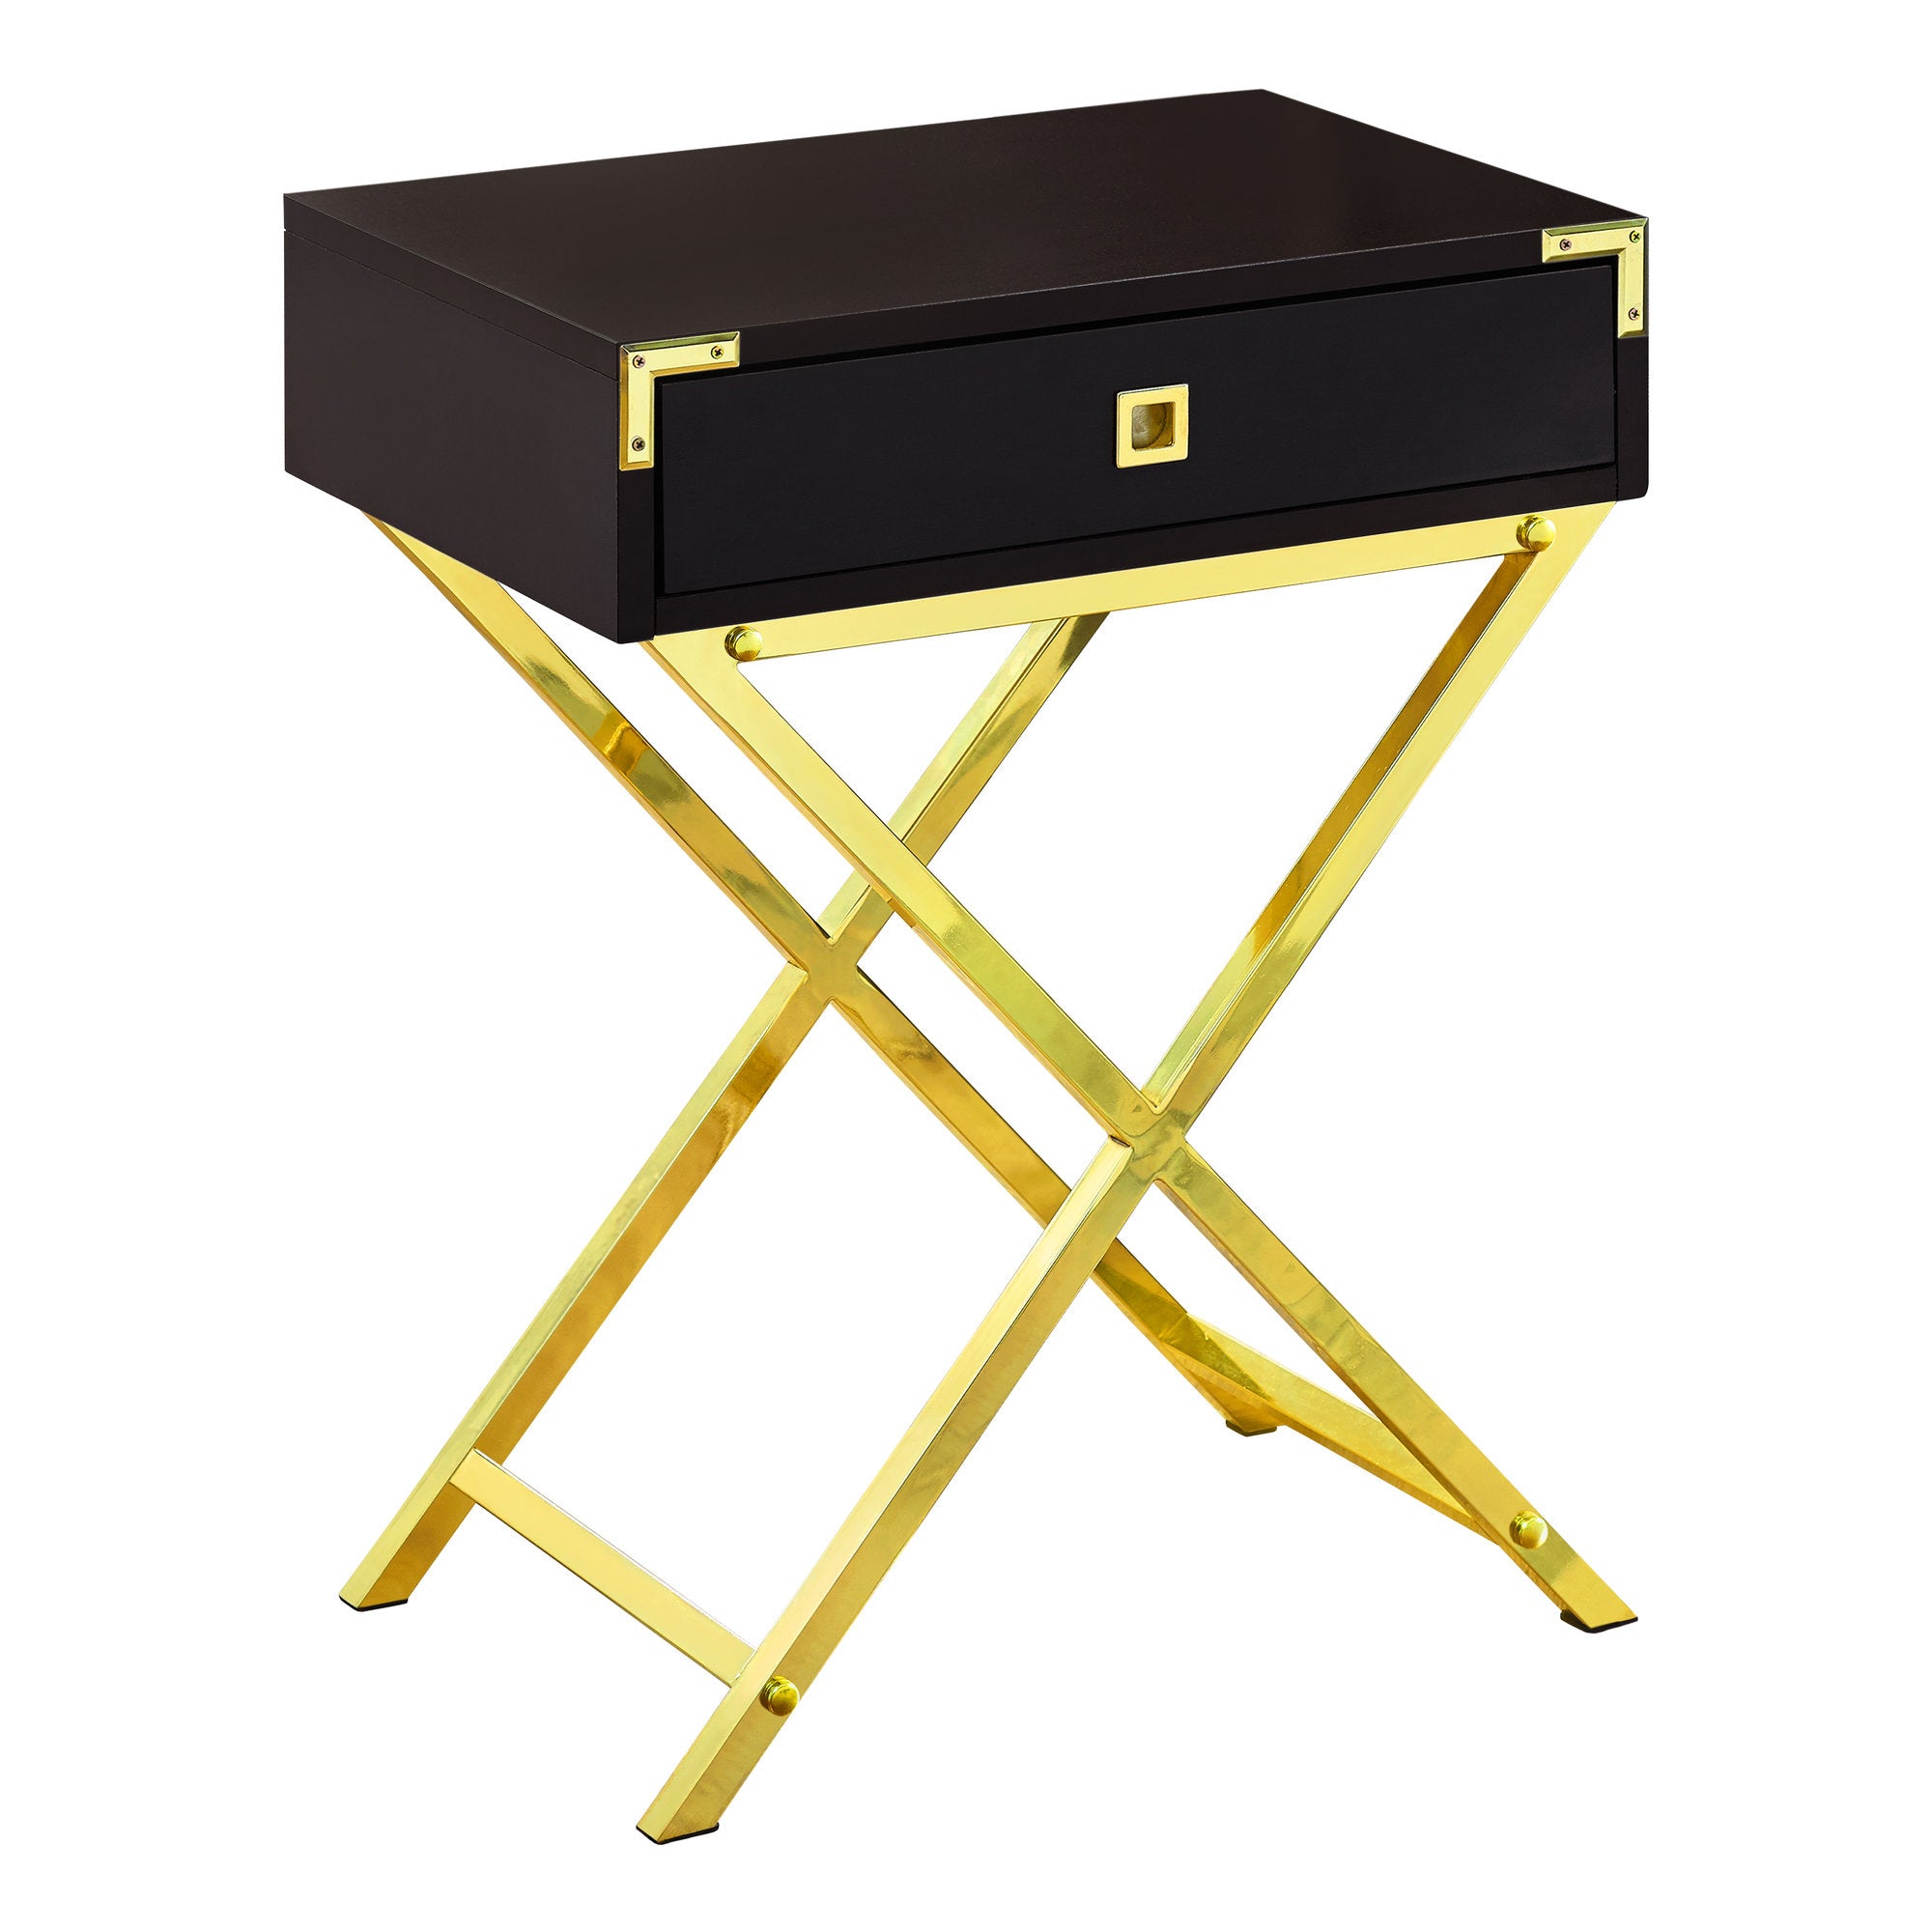 MN-323556    Accent Table, Side, End, Nightstand, Lamp, Living Room, Bedroom, Metal Legs, Laminate, Dark Brown, Gold, Contemporary, Modern